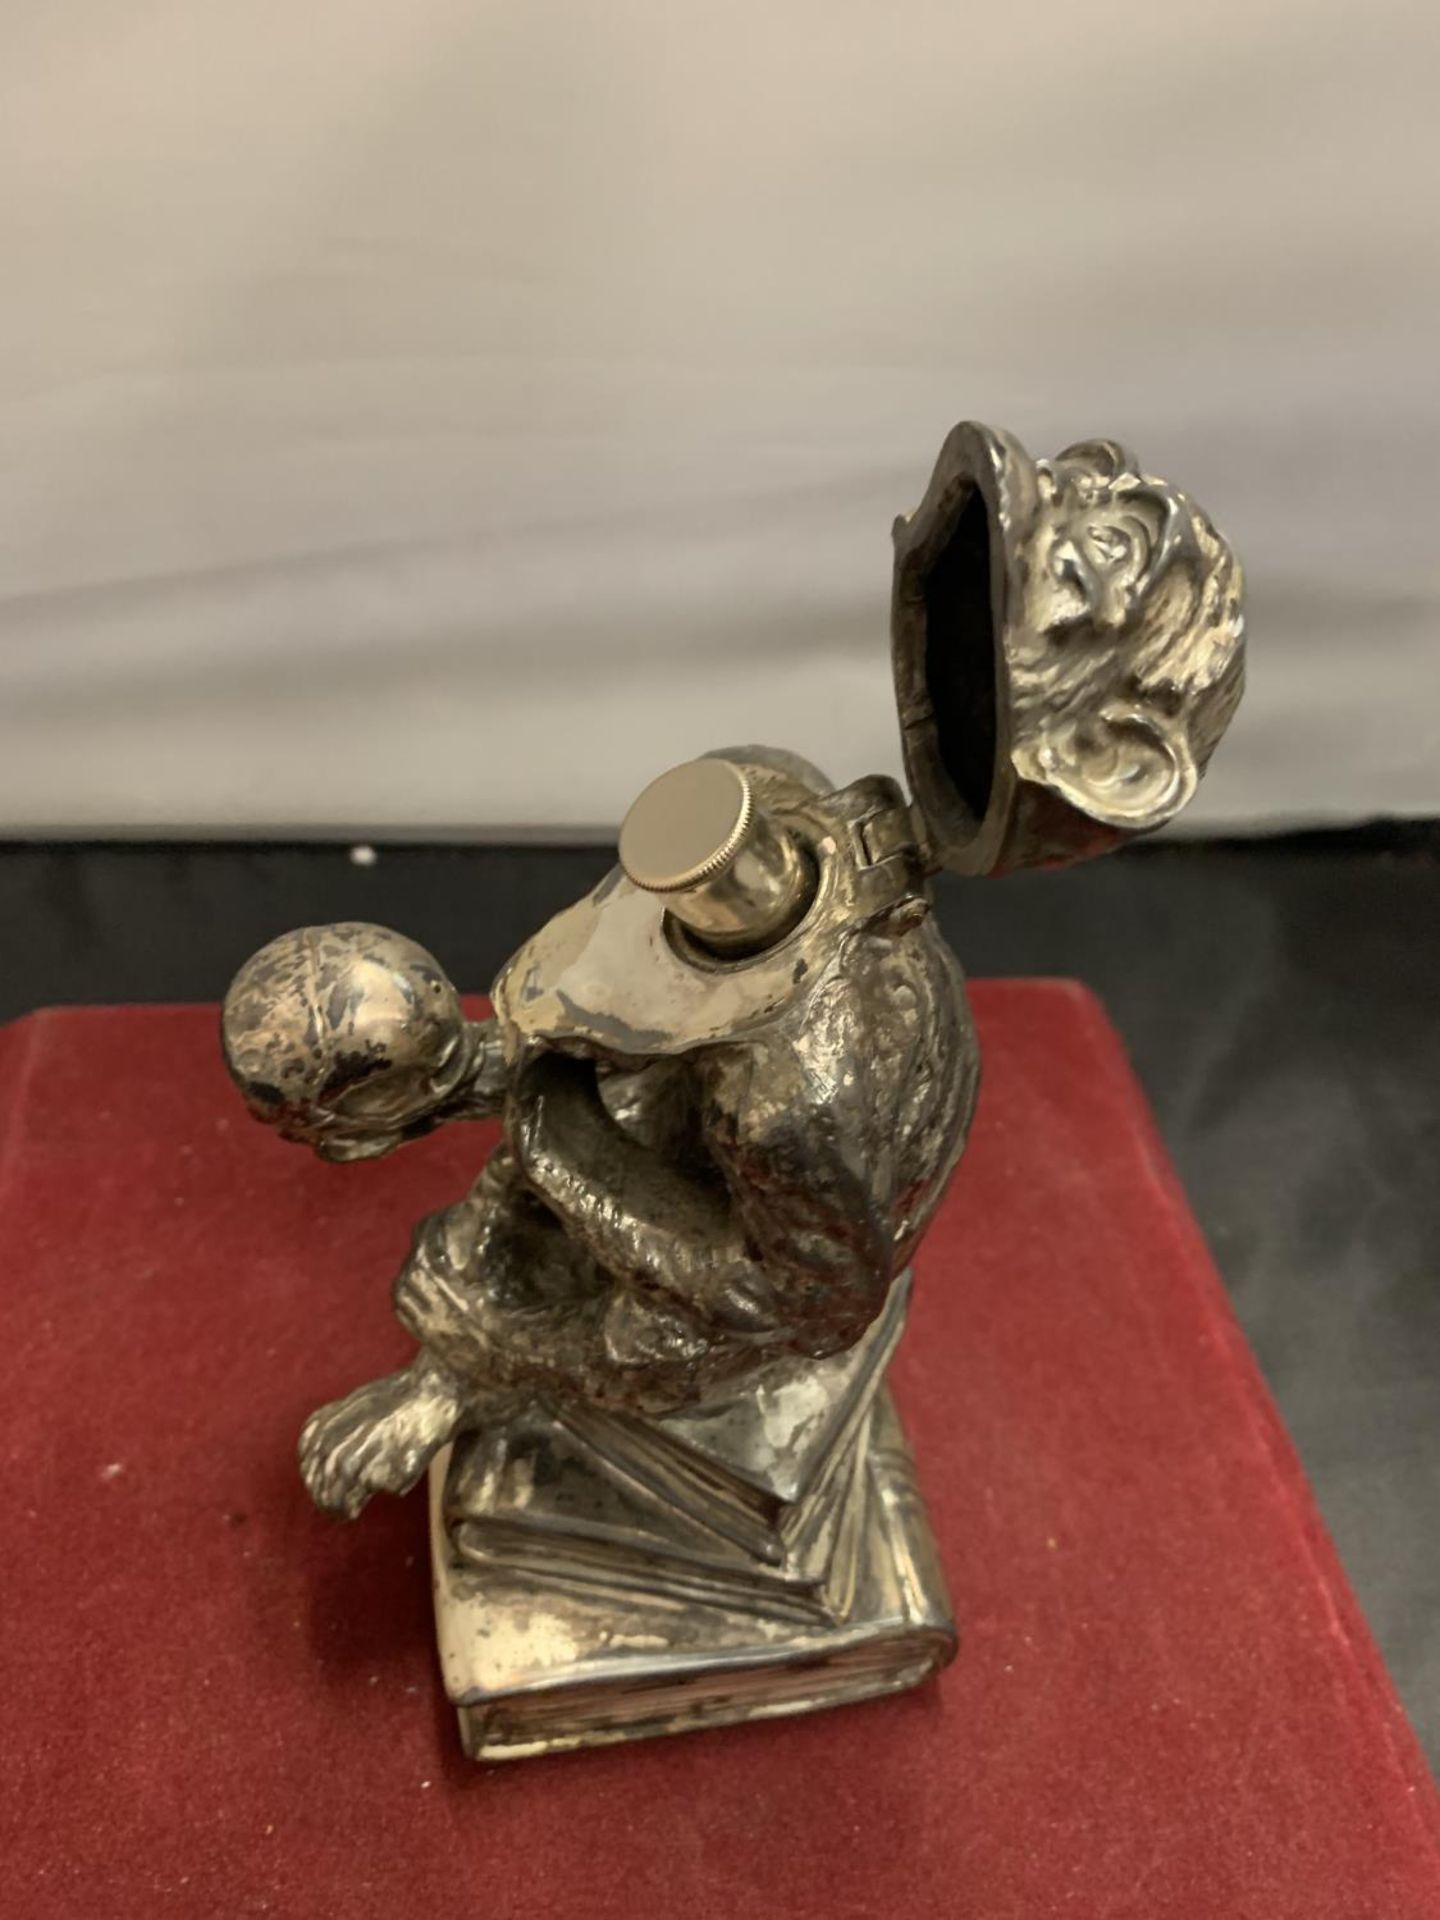 A CAST WHITE METAL TABLE LIGHTER IN THE FORM OF A MONKEY HOLDING A SKULL - Image 6 of 8